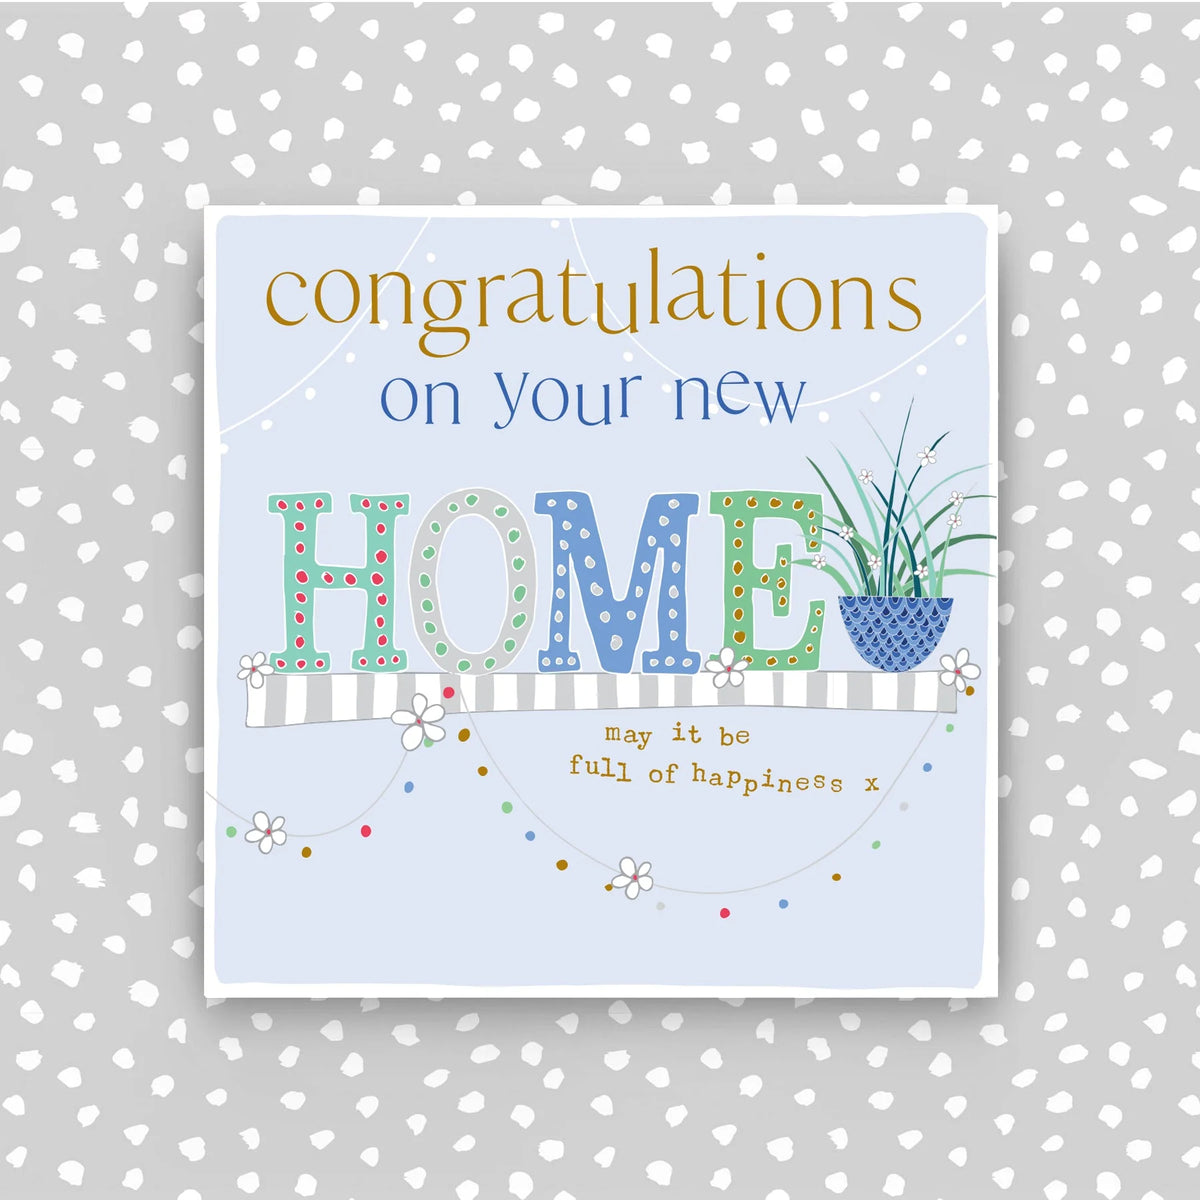 Congratulations on your New Home